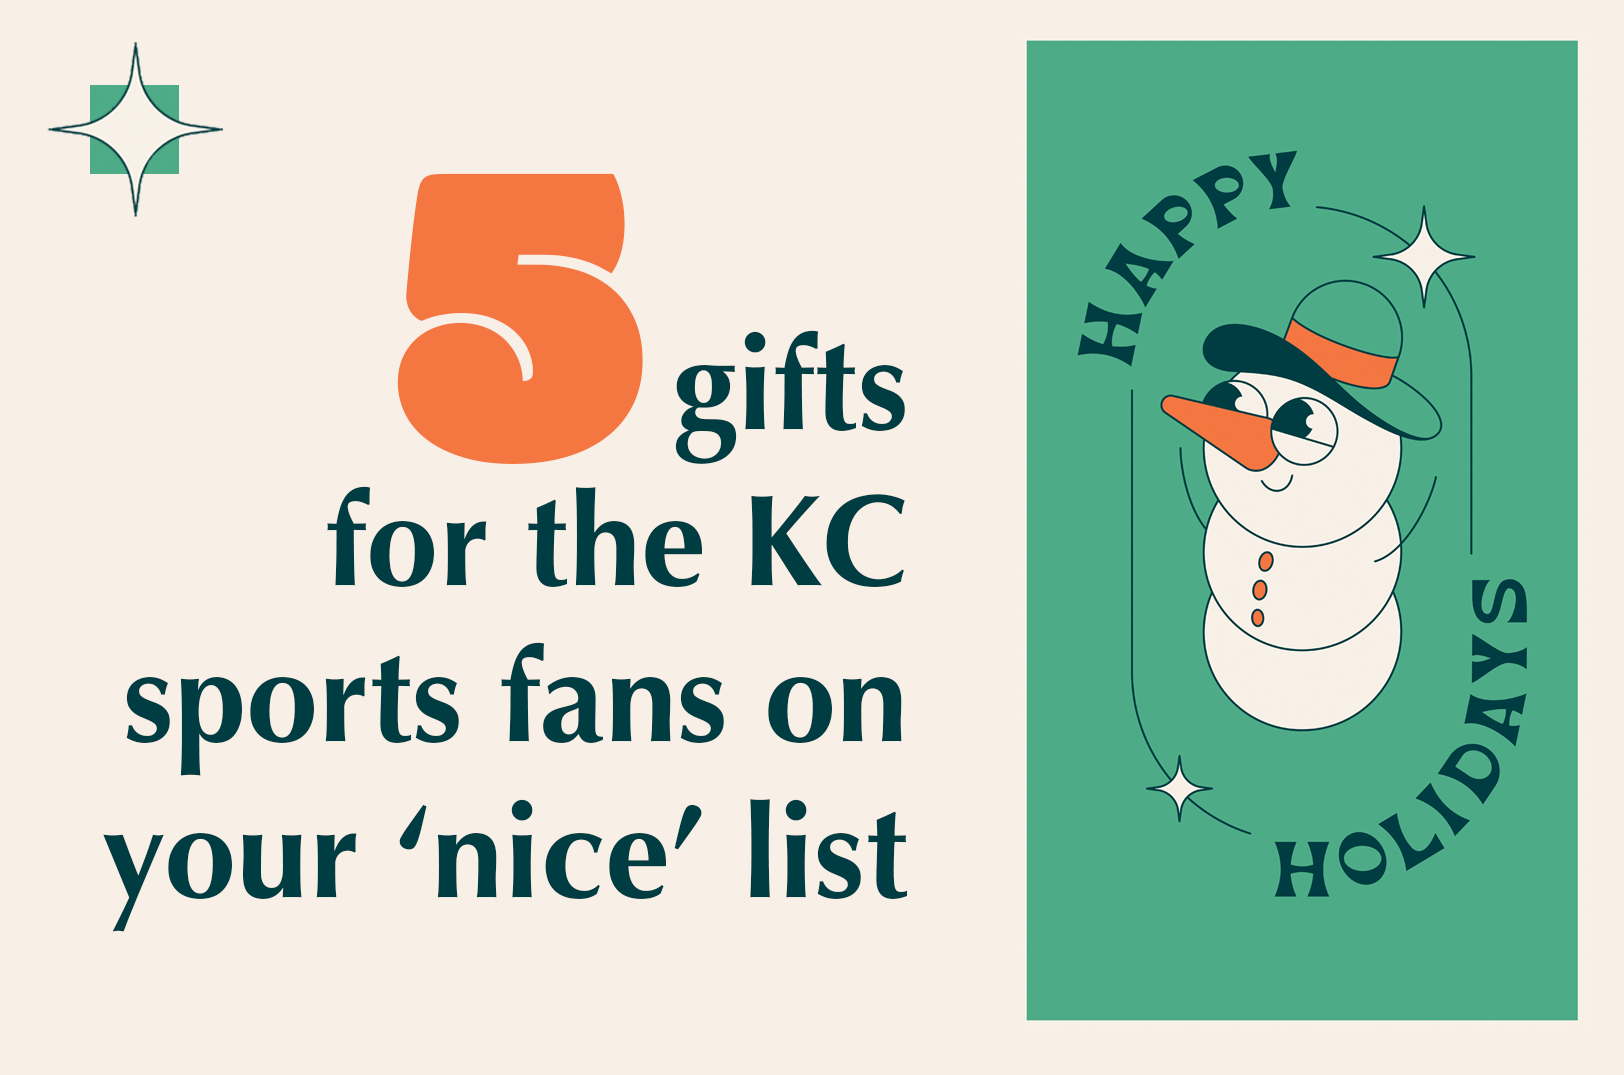 Shop Small: 5 gifts for the KC sports fans on your ‘nice’ list (KC Gift Guide)